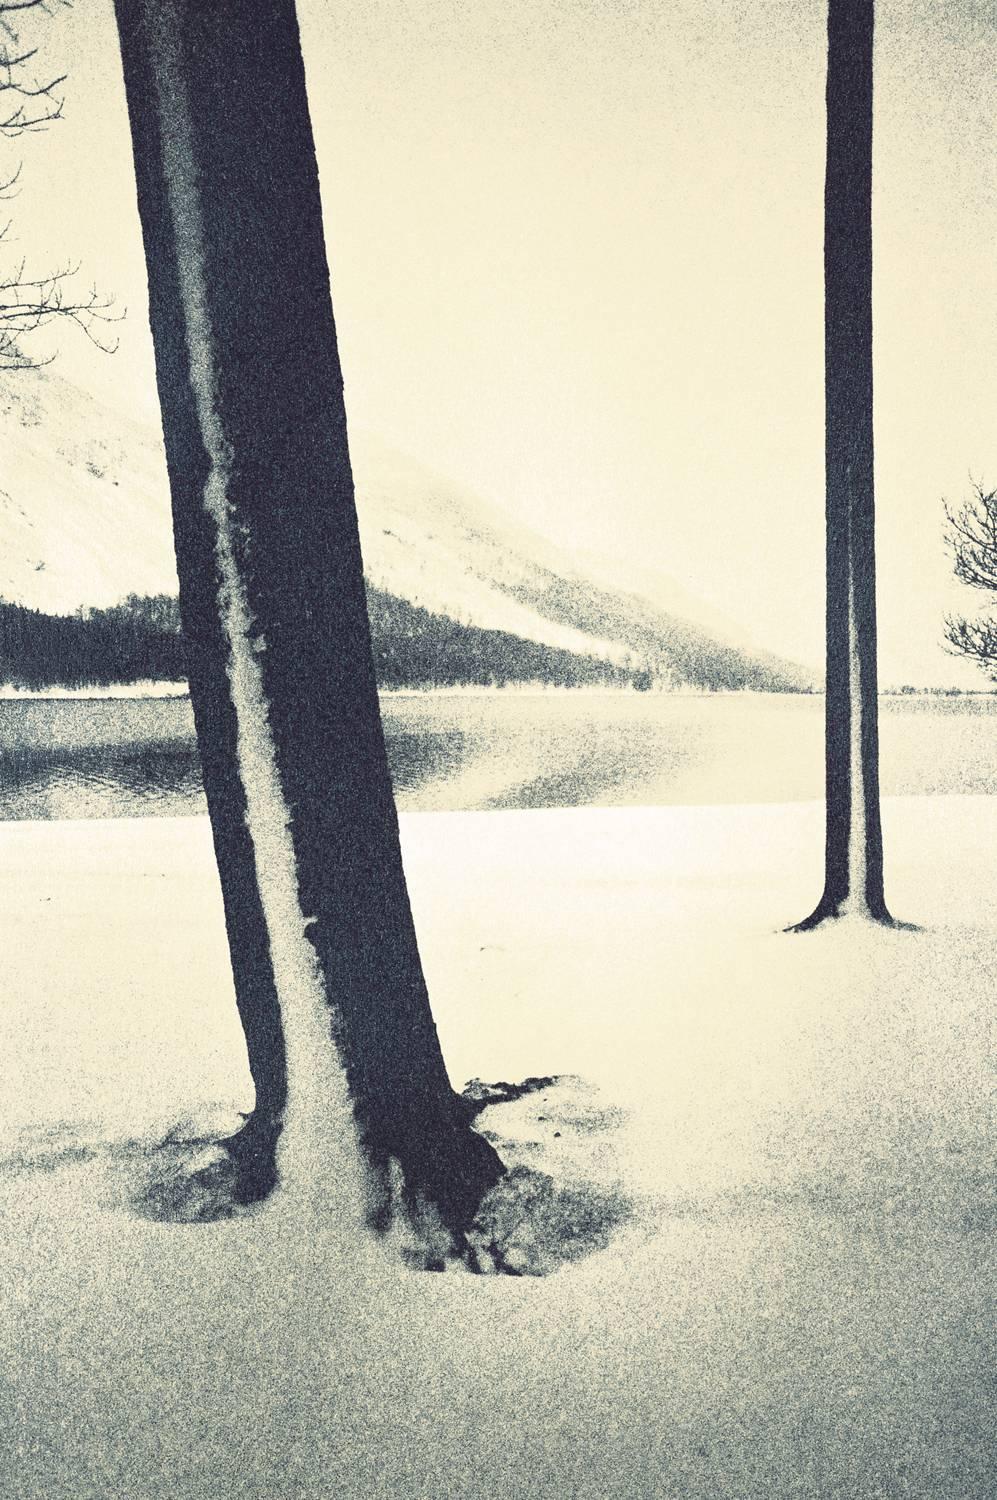 Jo Crowther Landscape Photograph - Buttermere in Winter (Photograph, Print, Winter, Nature, Wildlife, Outdoors)